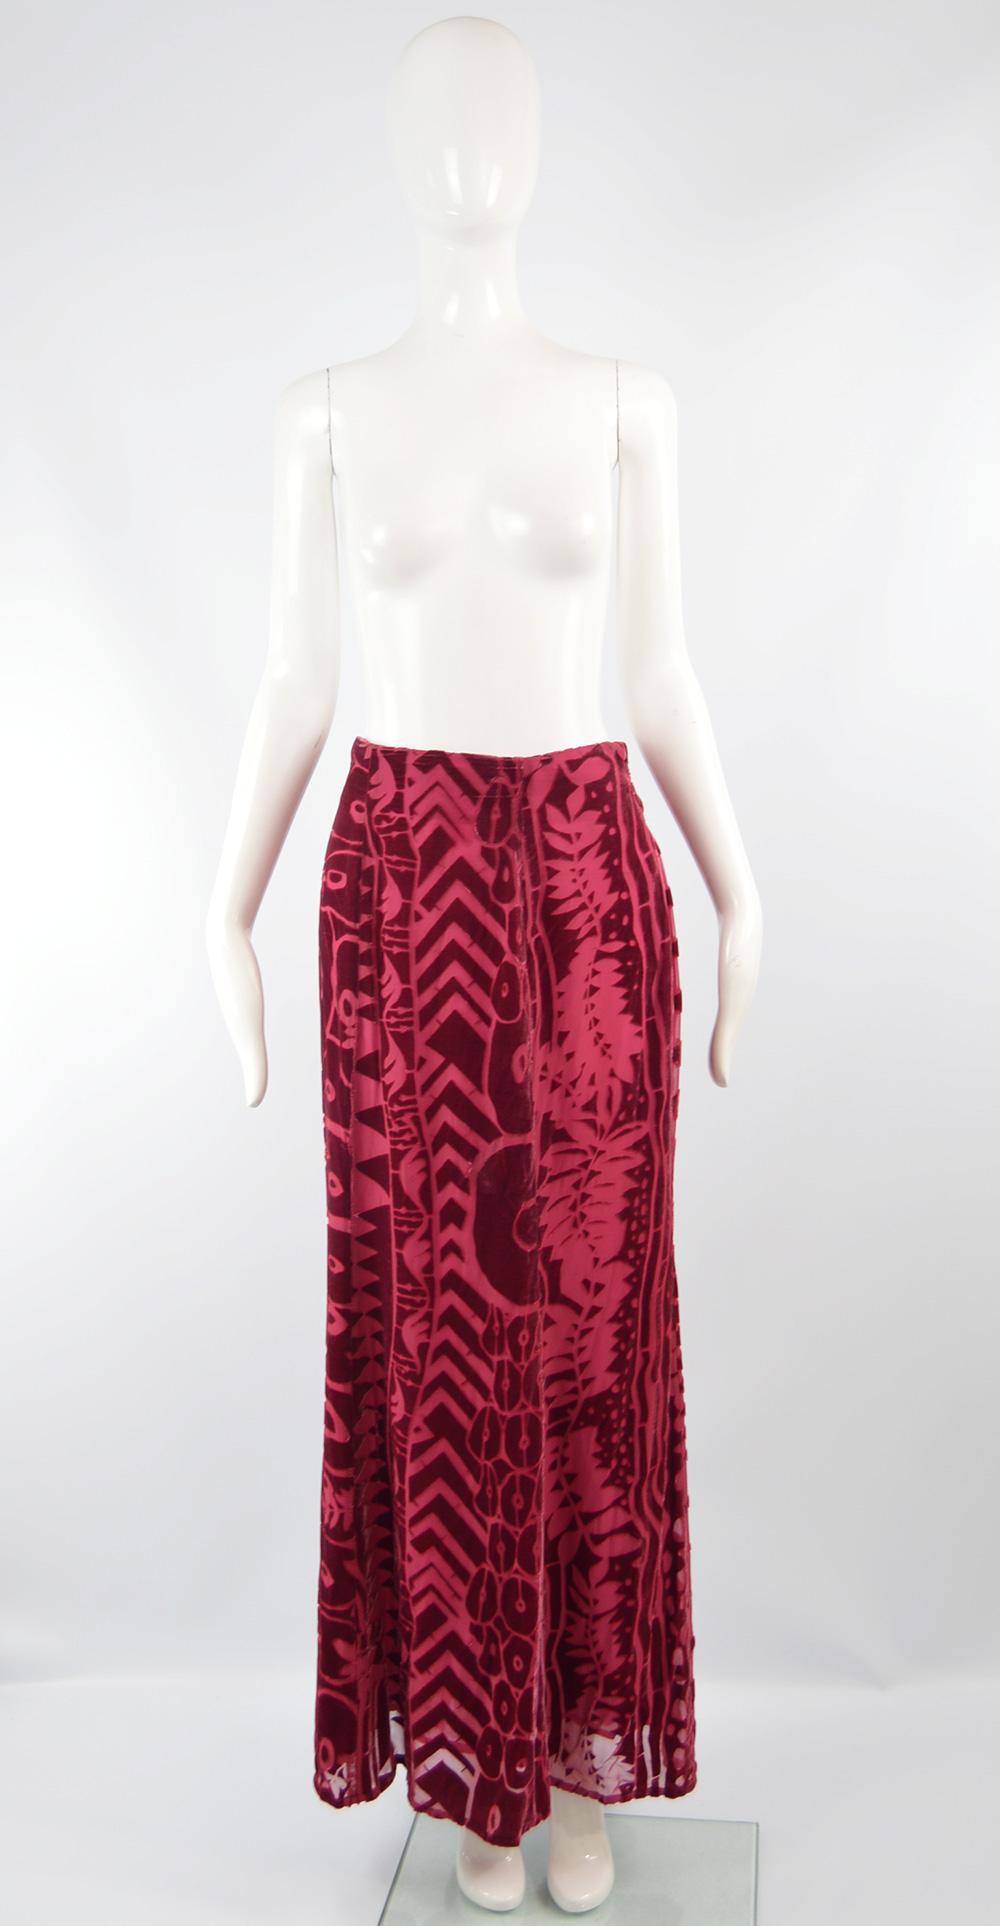 A stunning vintage skirt from the autumn / winter 1997 collection by legendary French fashion designer, Christian Lacroix. In a cranberry / pinkish red silk and rayon blend semi sheer, burnout velvet / devore fabric with a tribal inspired pattern.